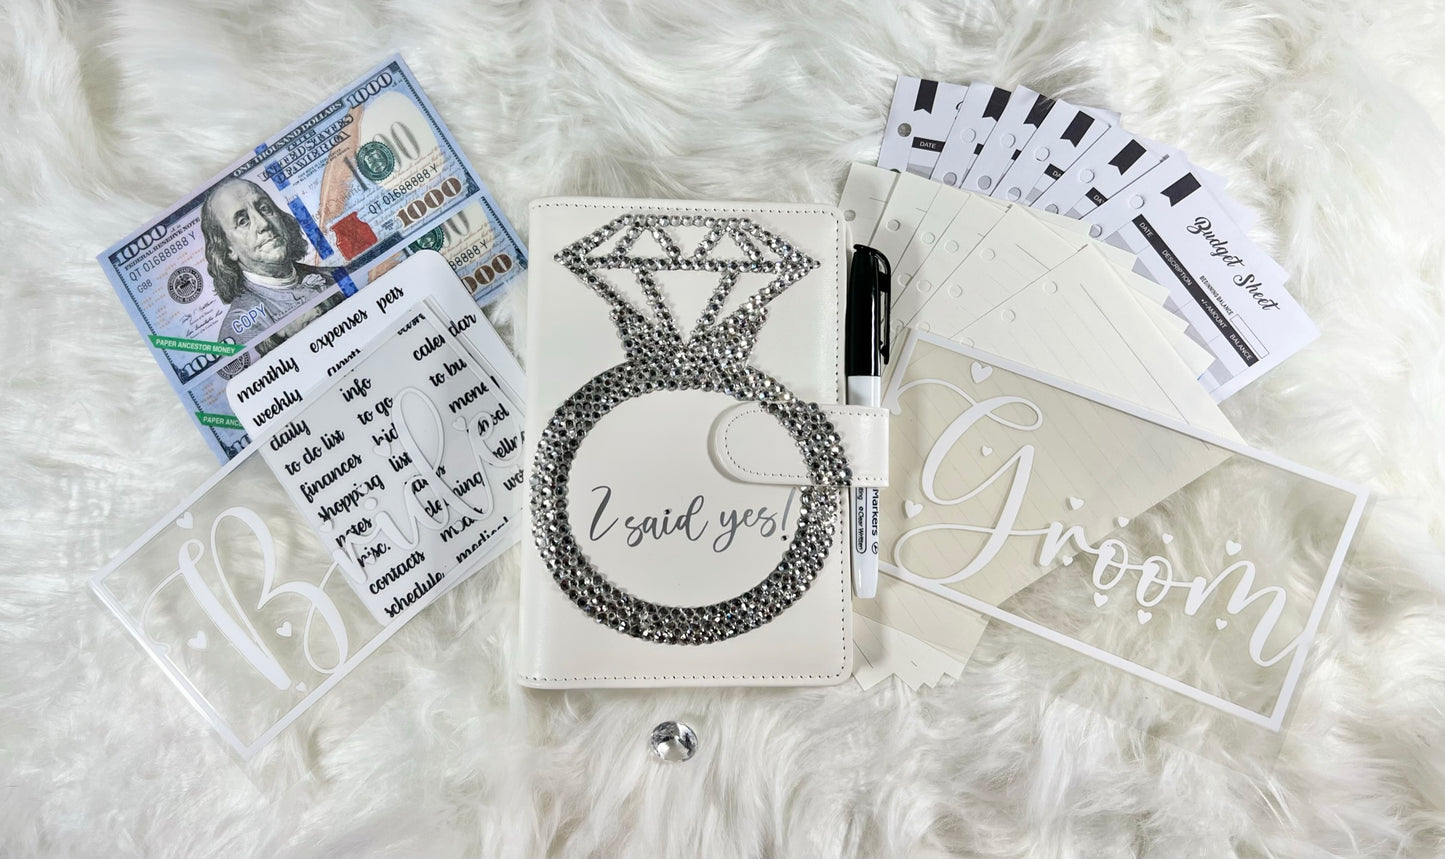 "I Said Yes" Engagement Ring Budget Binder Package with Handcrafted Envelopes - A6